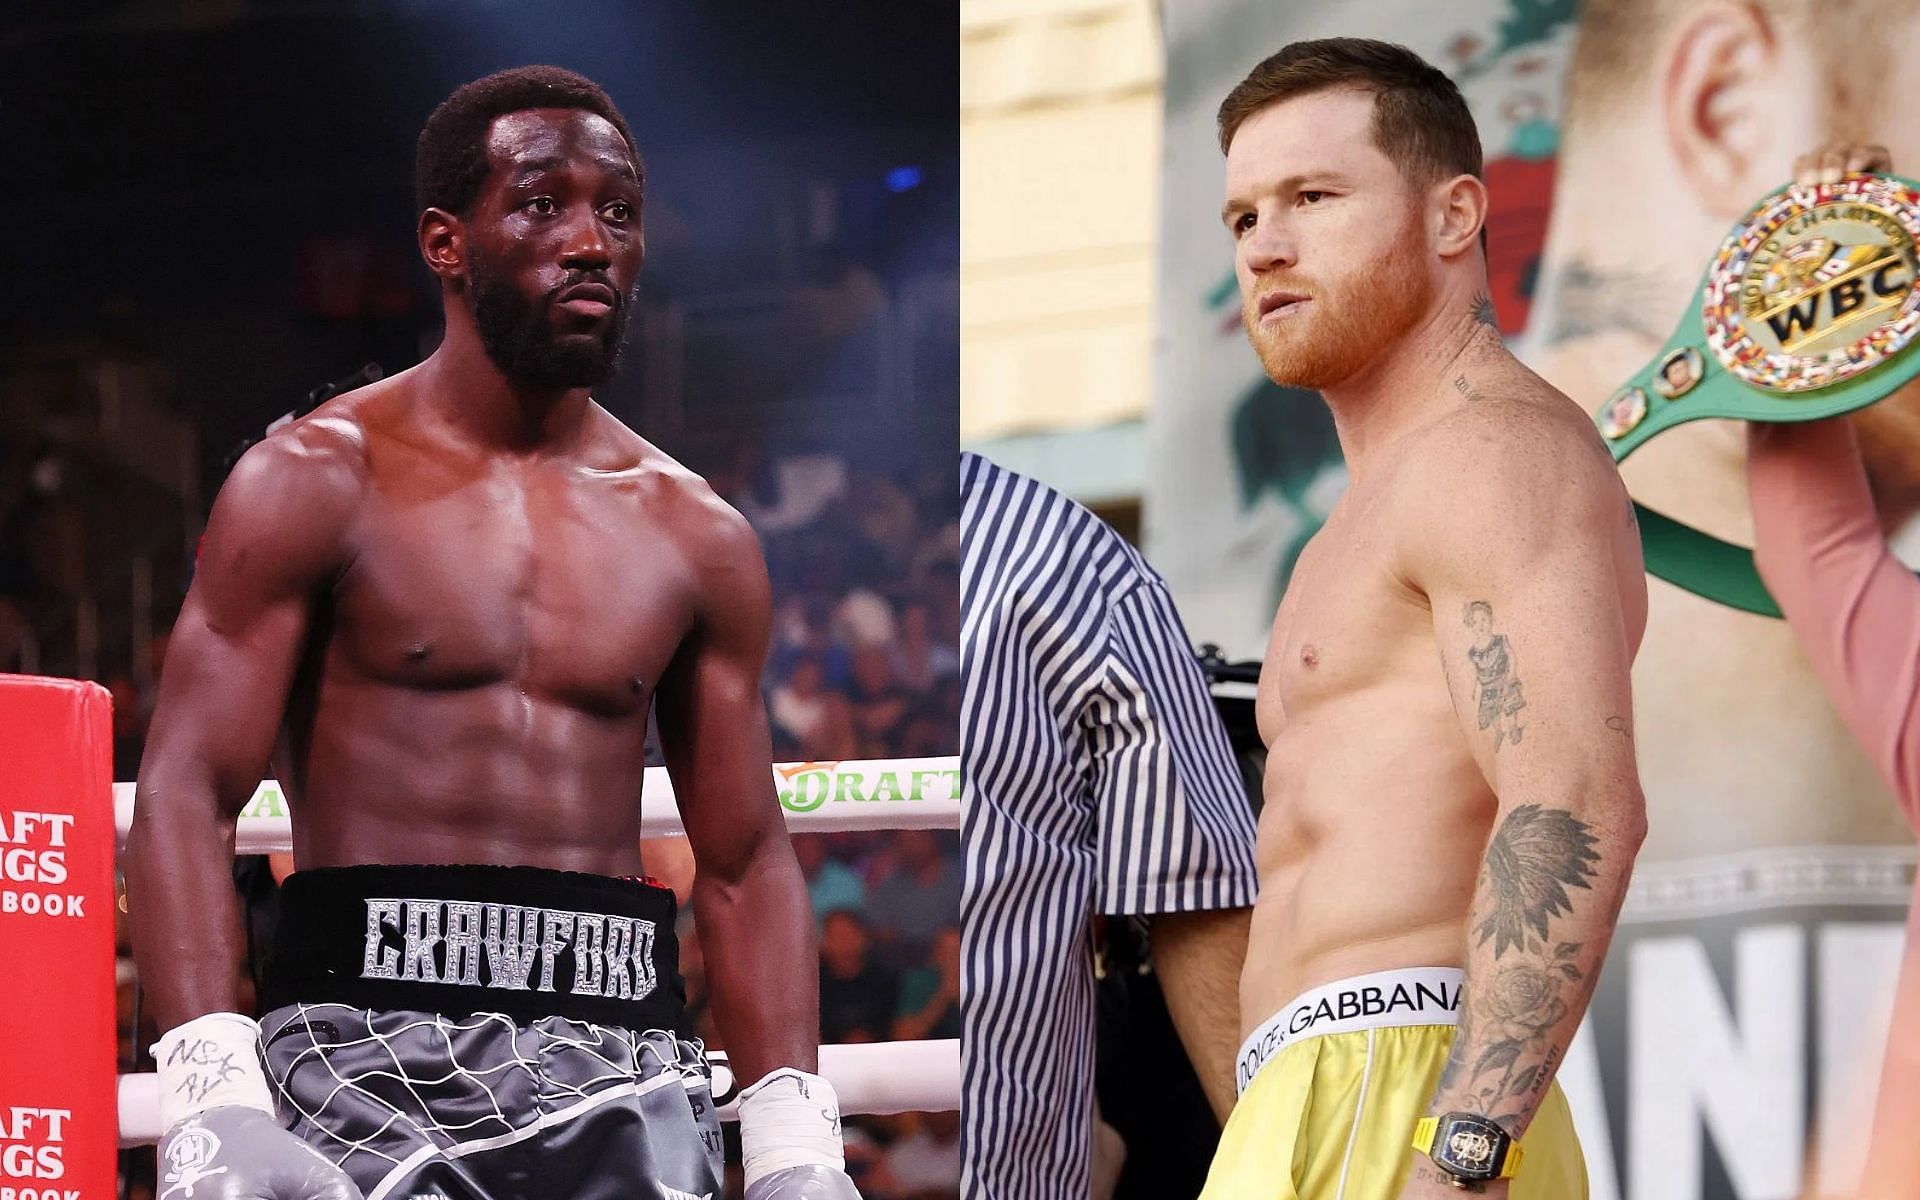 A fight between Terence Crawford (left) and Canelo Alvarez (right) has been backed by Errol Spence Jr. [Images courtesy: Getty Images]